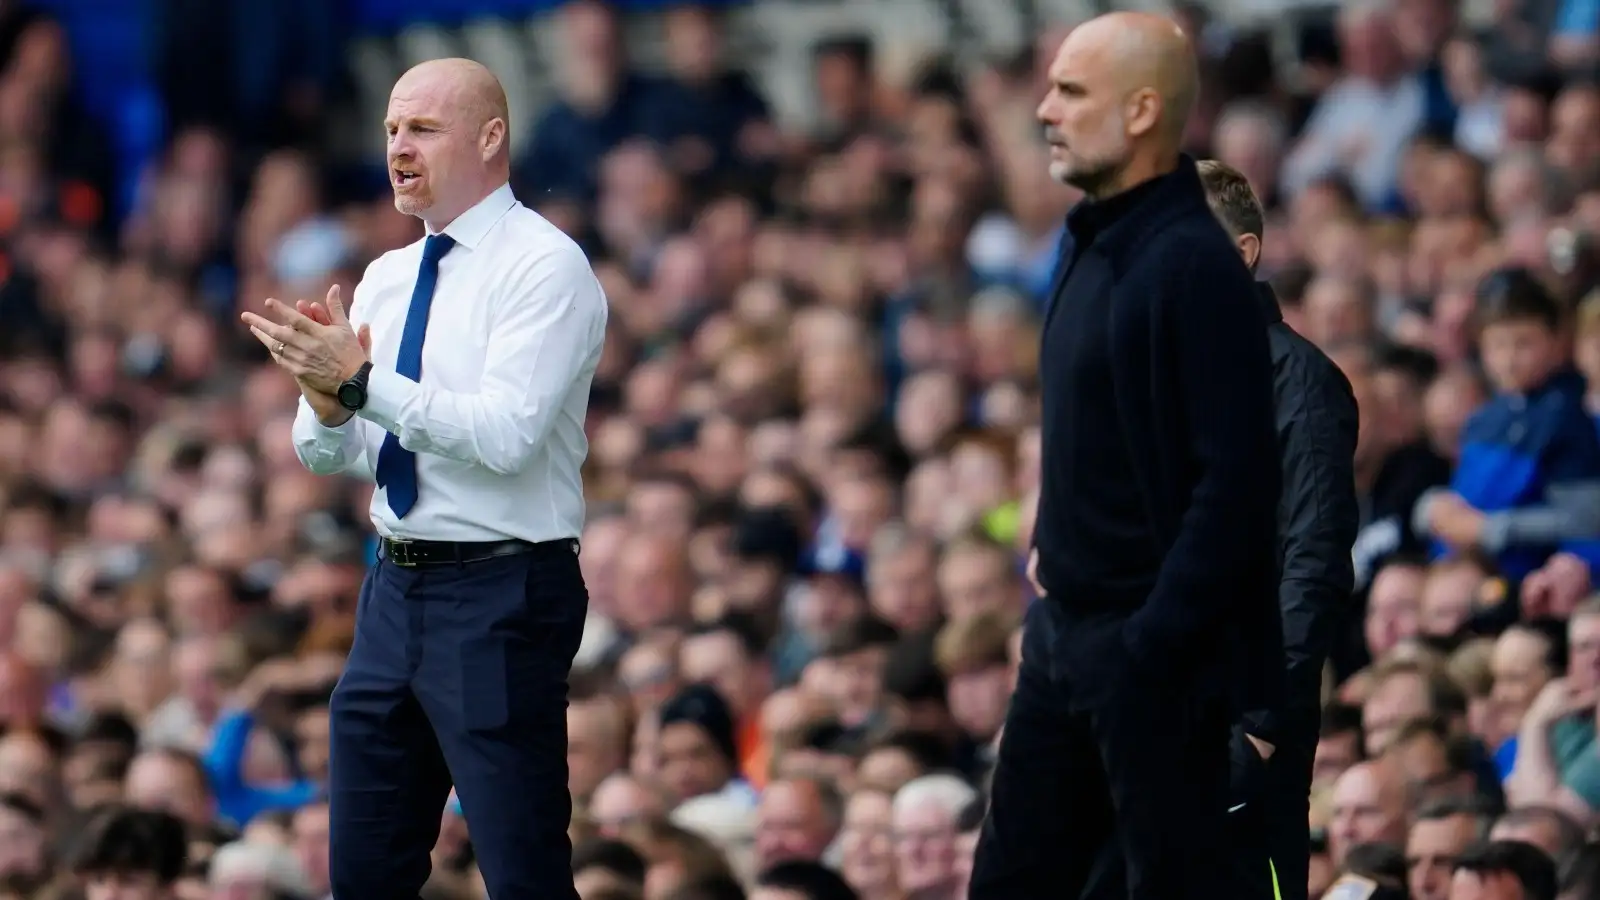 Sean Dyche and Pep Guardiola on the touchline while Everton face Manchester City.